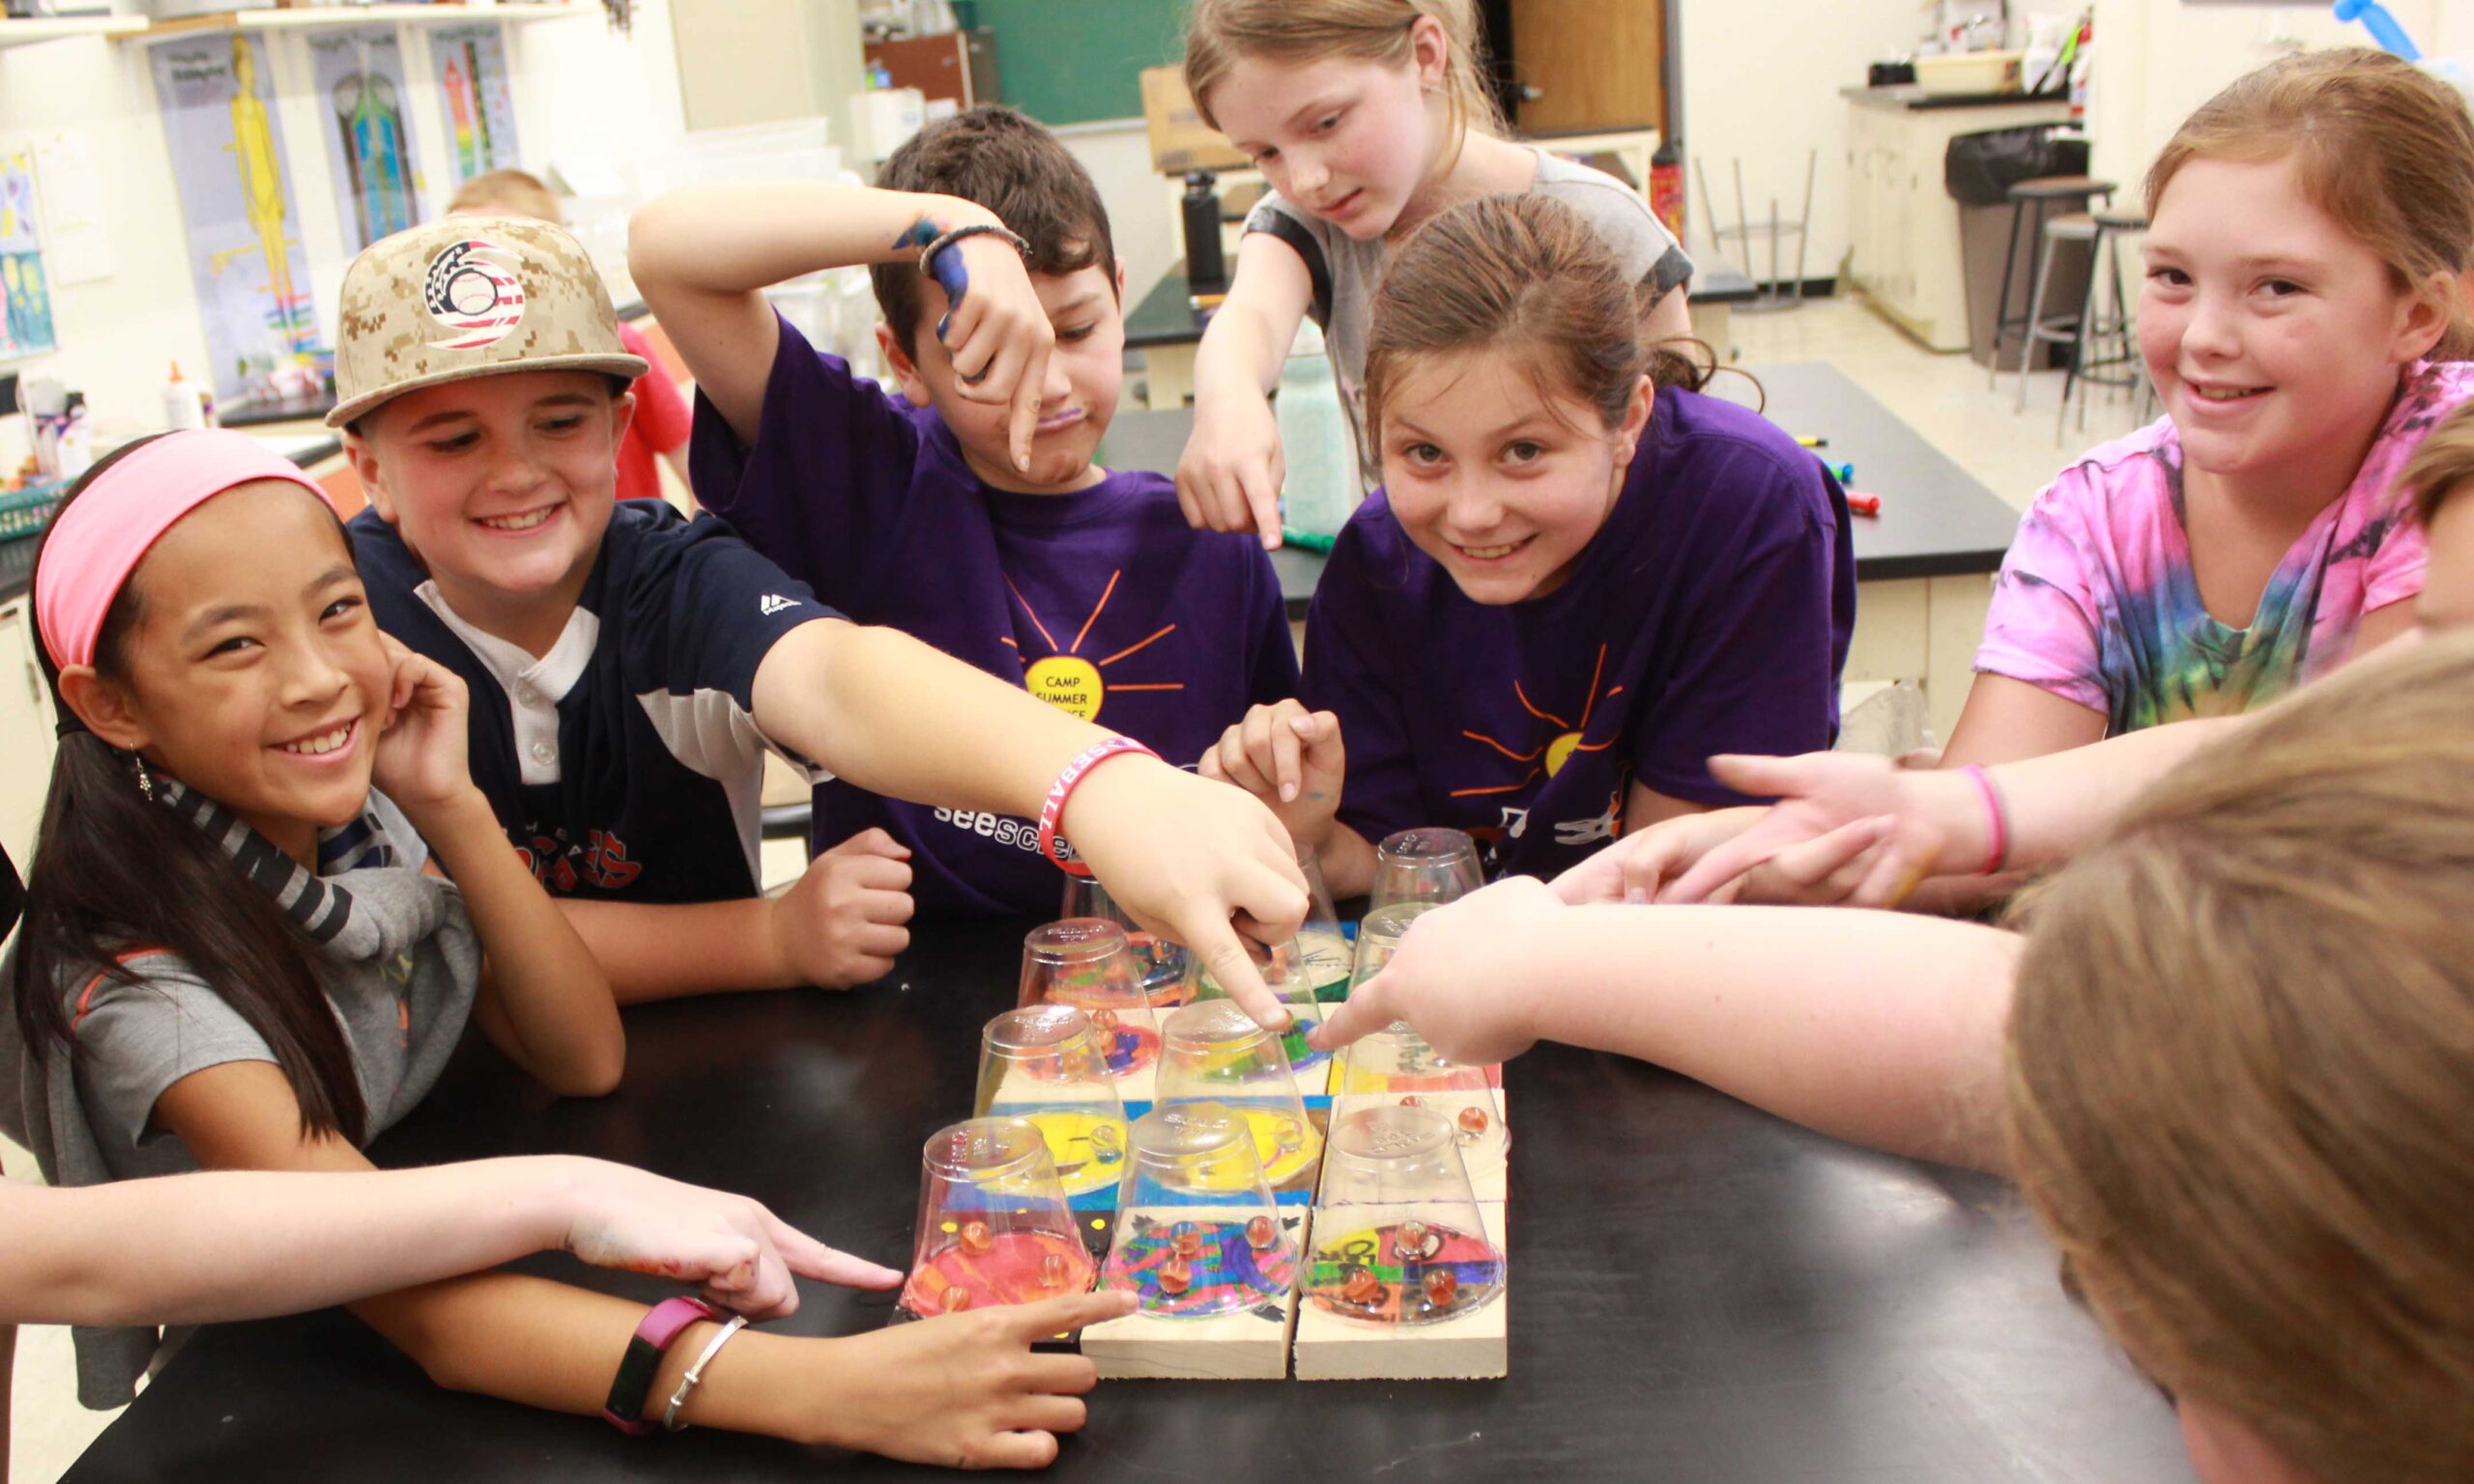 A group of campers show of the games they made.